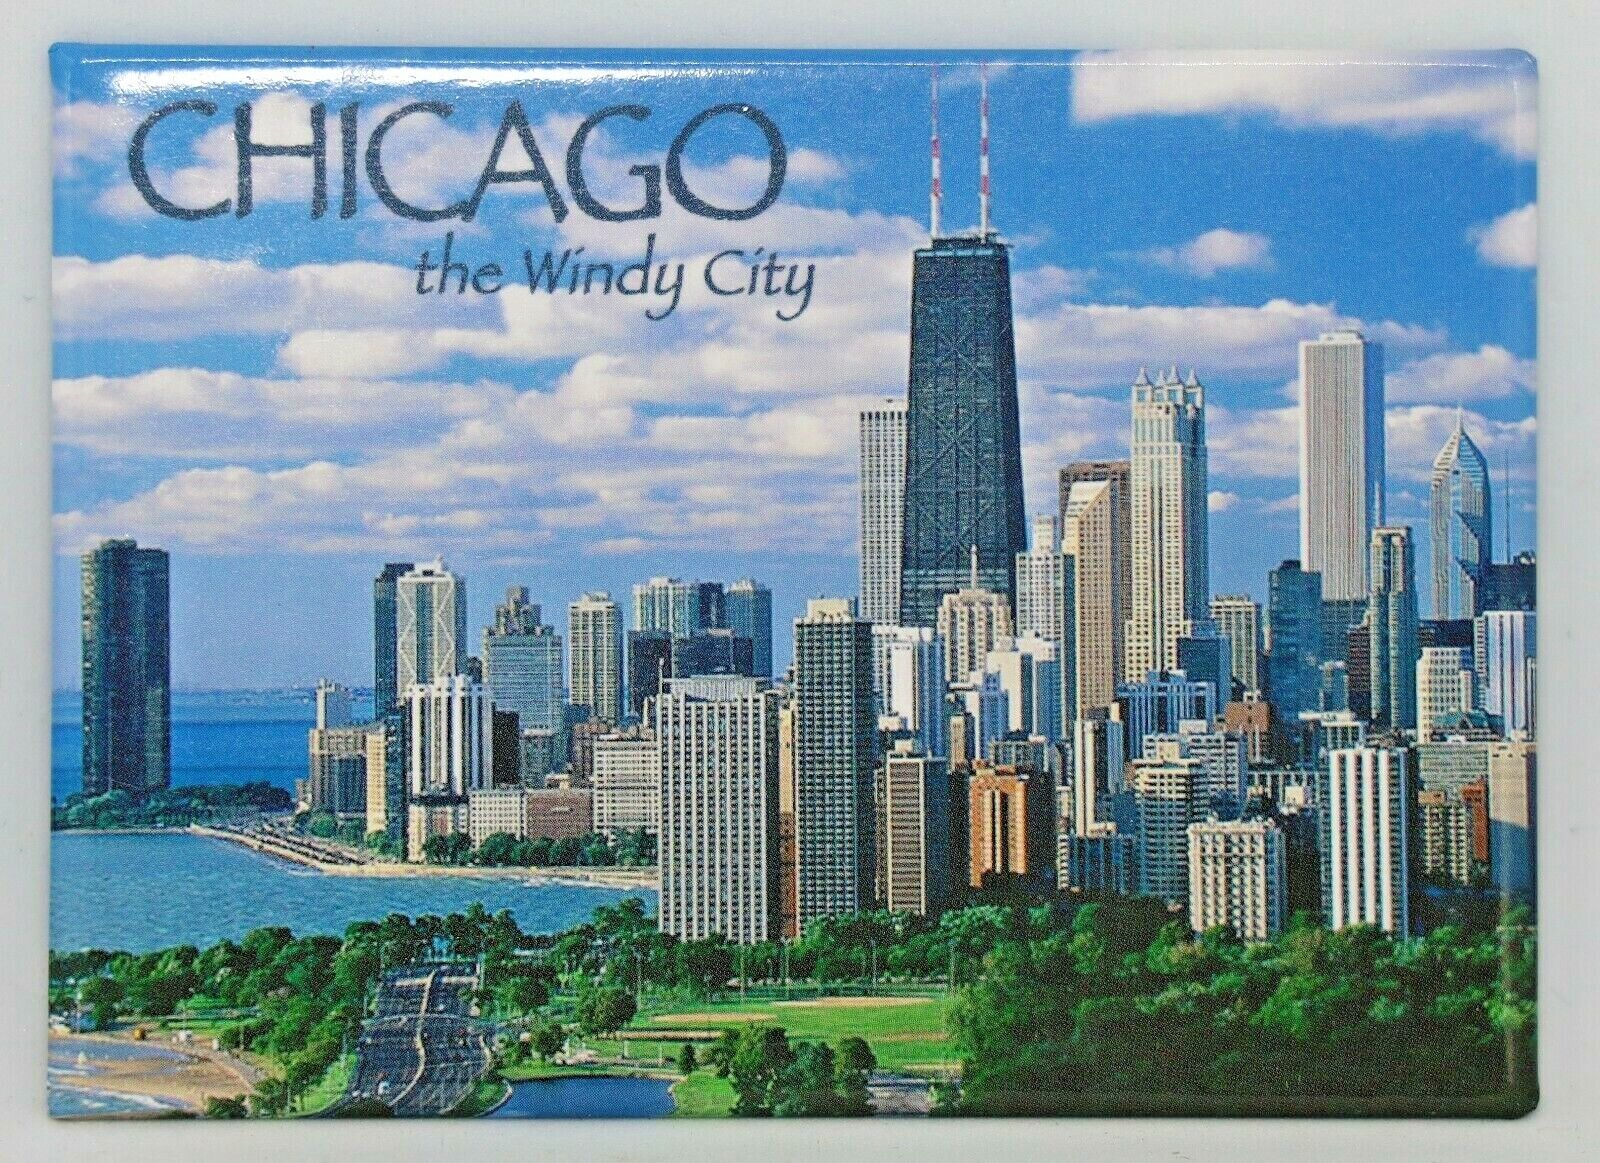 Chicago Illinois Windy City Photo Collage Magnet 2.5